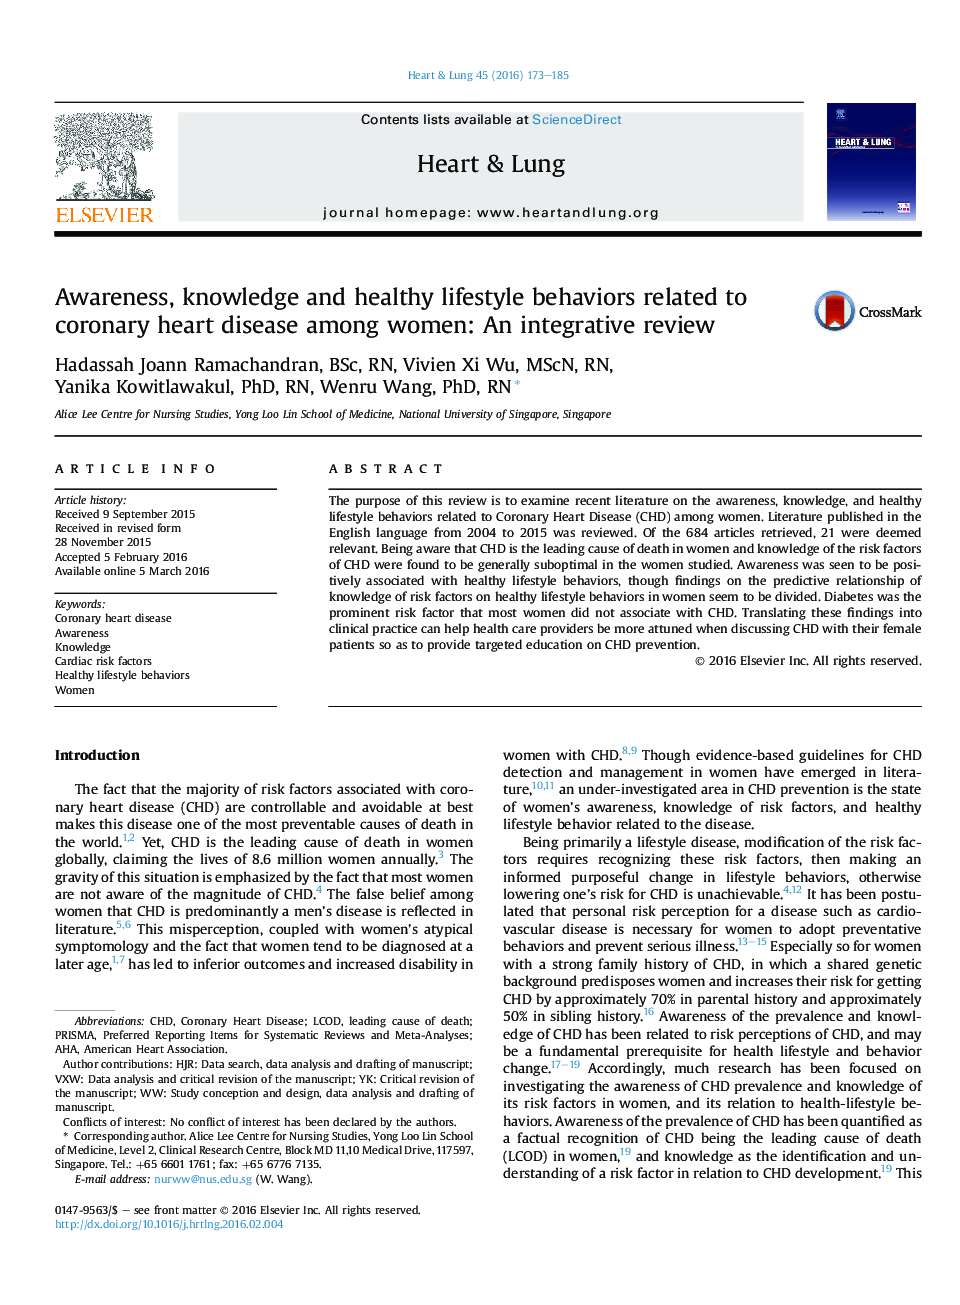 Awareness, knowledge and healthy lifestyle behaviors related to coronary heart disease among women: An integrative review 